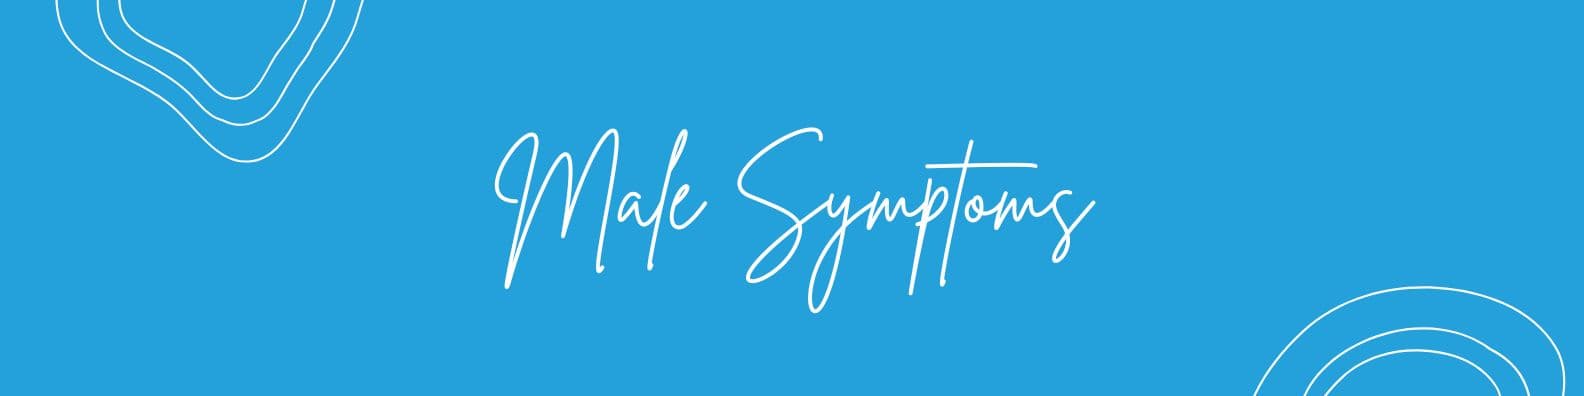 Male Symptoms Solid Blue background